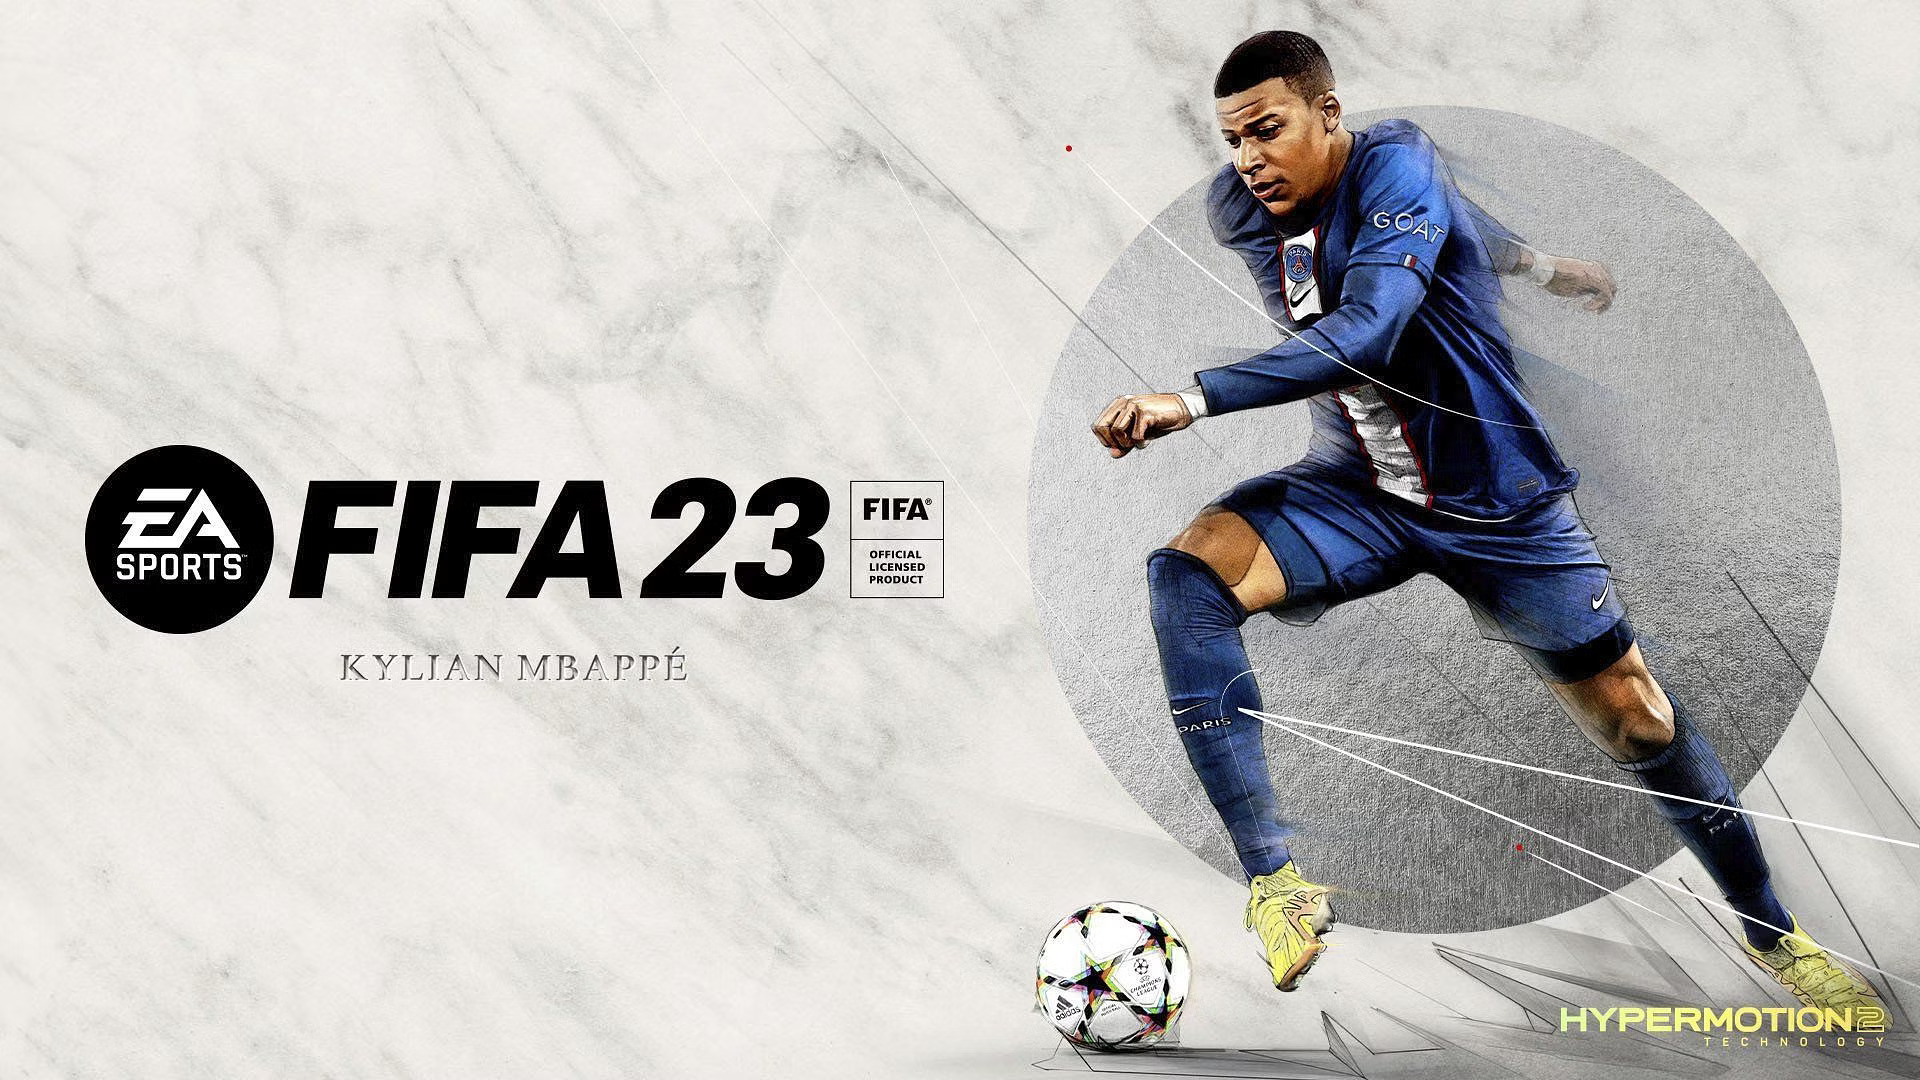 EA FIFA 23 players speed & stats feeling weaker during games? Here are the potential causes